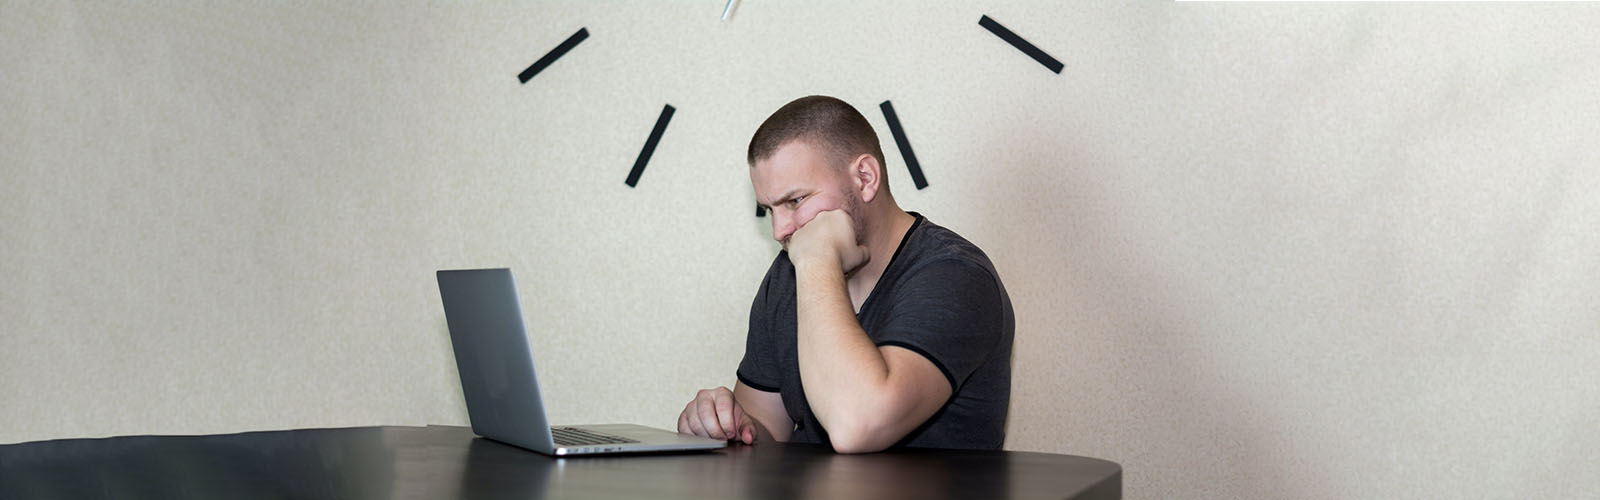 Man looking at a laptop under a clock